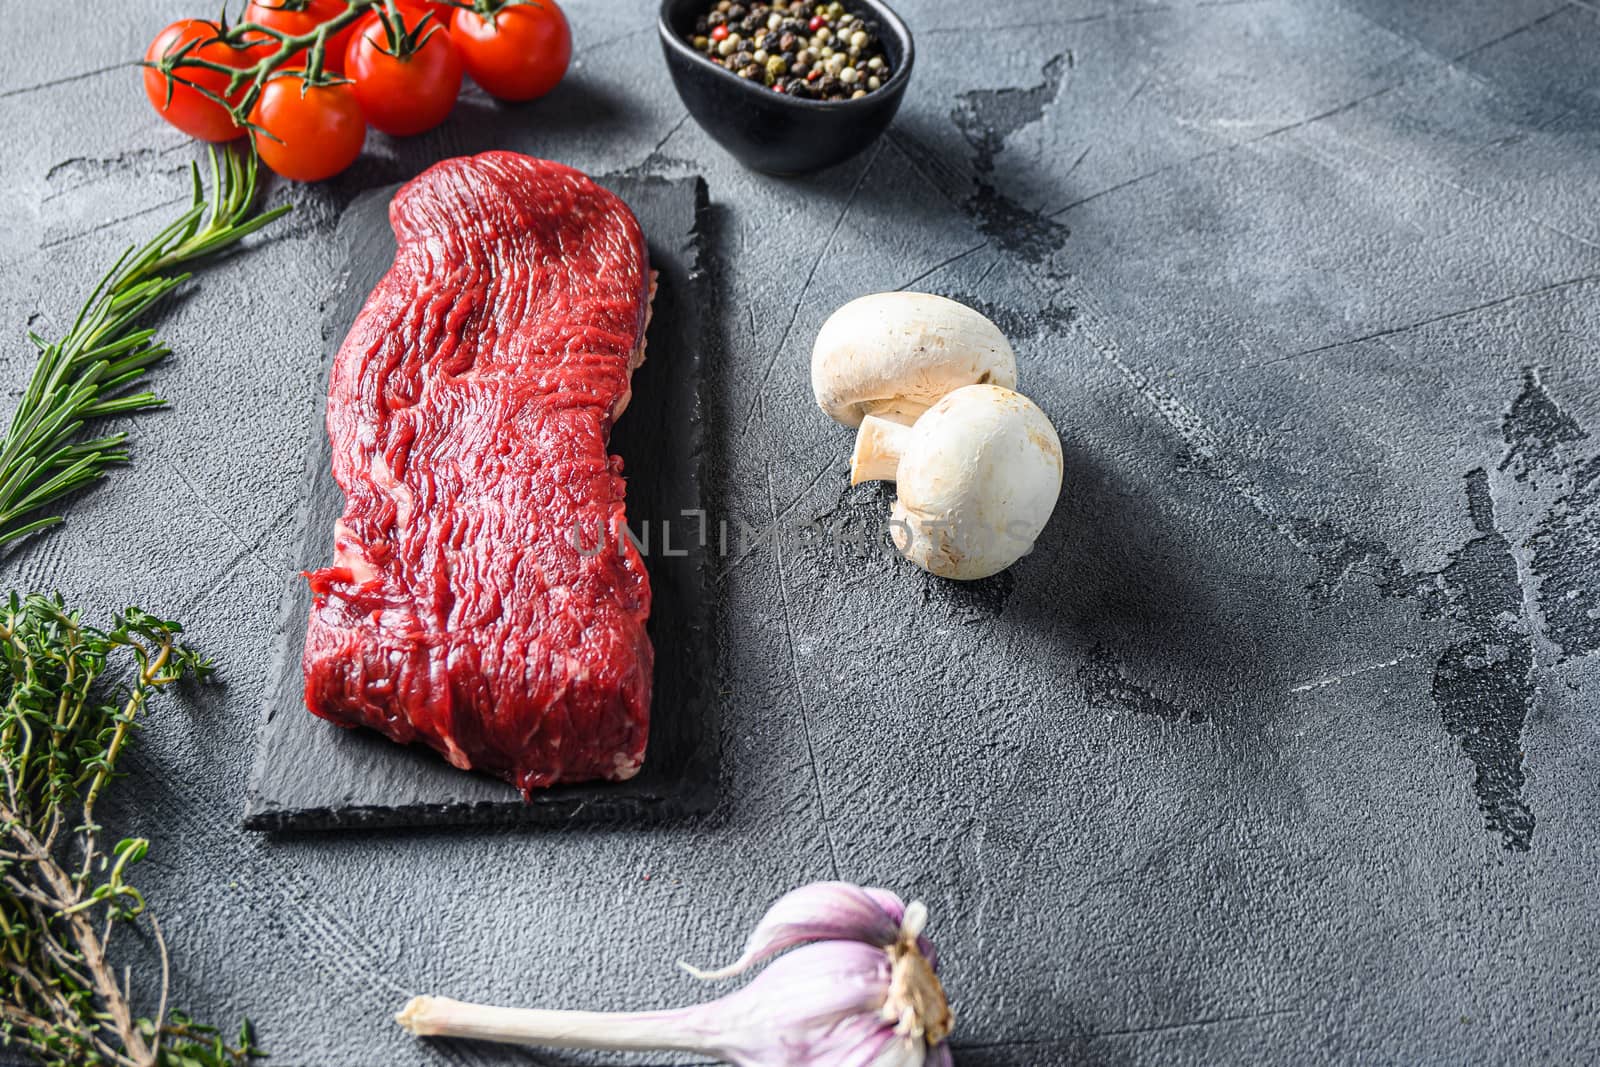 Organic Tri-tip, triangle roast marbled beef on black plate , marbled beef with herbs tomatoes peppercorns over grey stone surface background side view space for text new wide angle.